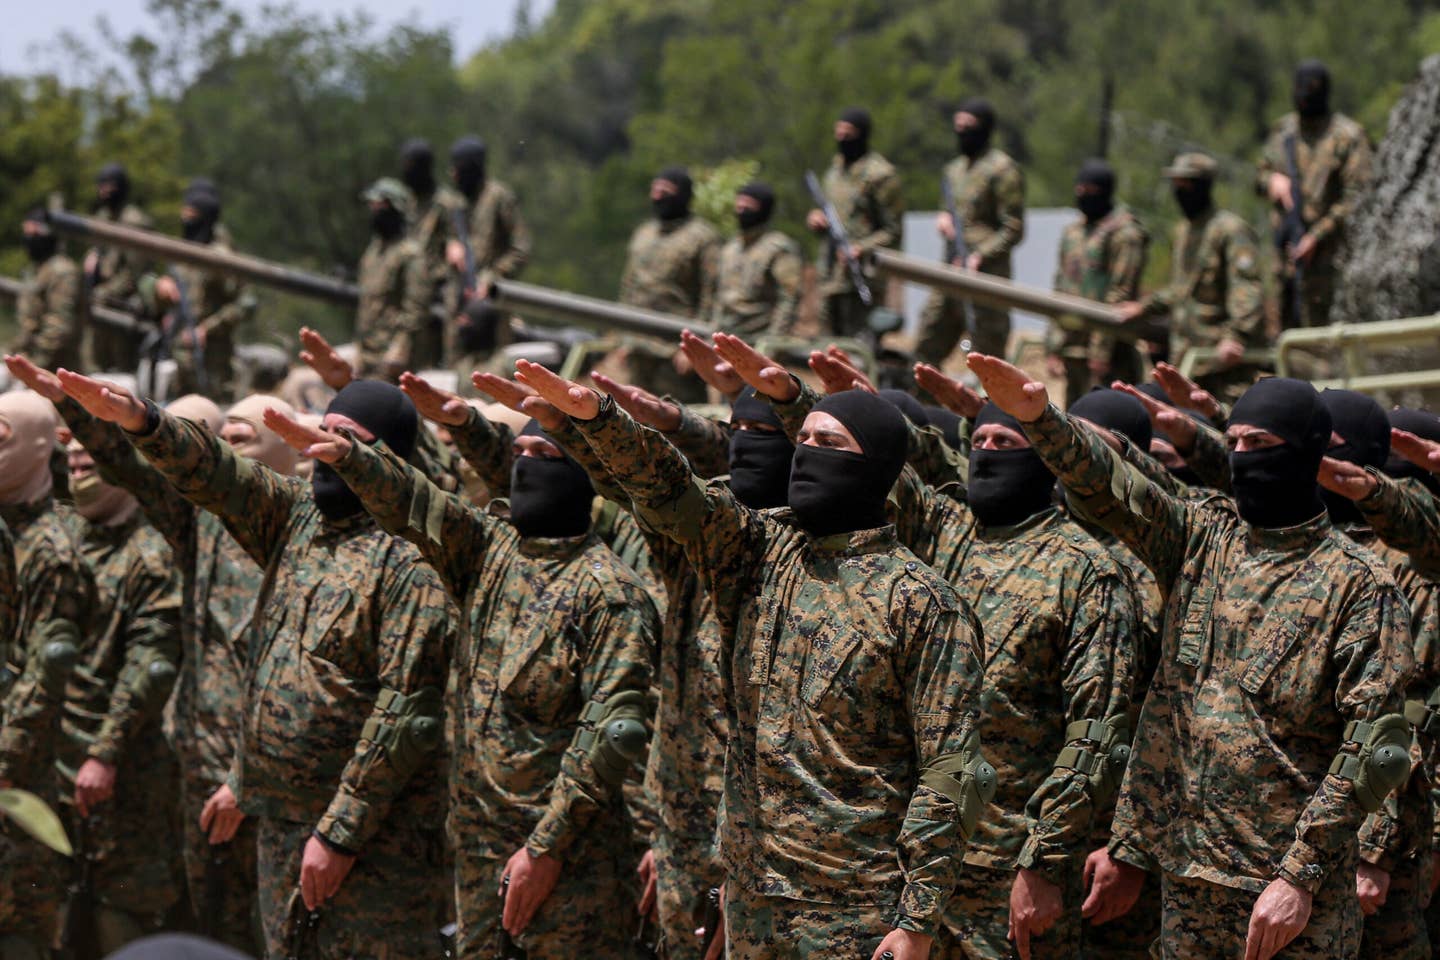 21 May 2023, Lebanon, Aramta: Pro-Iranian Hezbollah fighters take the oath during a staged military exercise in a camp in the Lebanese southern village of Aramta. The show came ahead of the 23rd "Liberation Day", the annual celebration of the withdrawal of Israeli forces from south Lebanon on May 25, 2000. Photo: Marwan Naamani/dpa (Photo by Marwan Naamani/picture alliance via Getty Images)